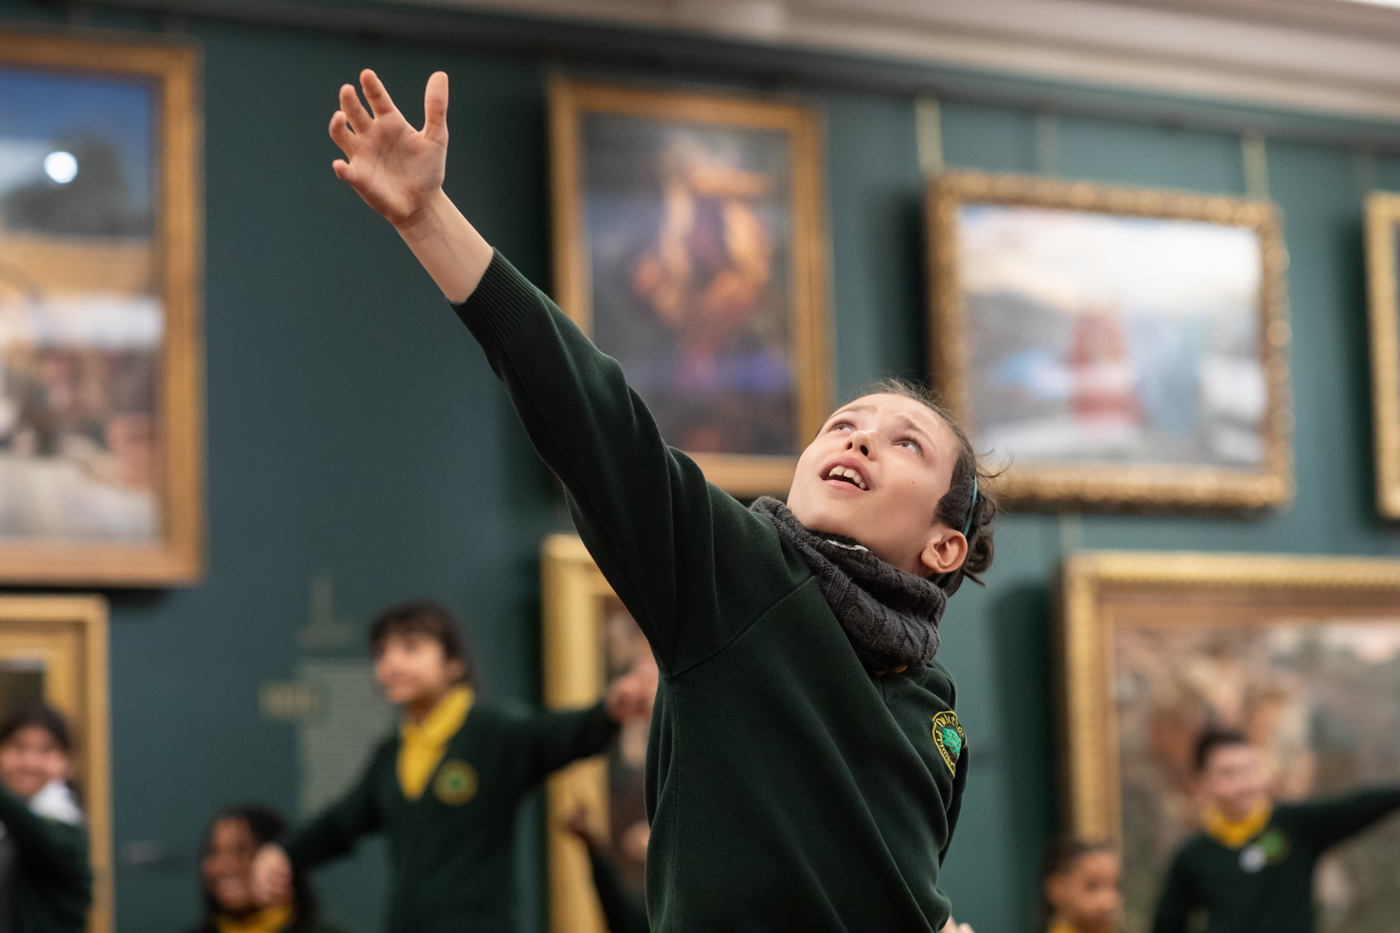 A child in a green uniform joyfully reaches upward, surrounded by classmates, with framed artwork visible in the background.